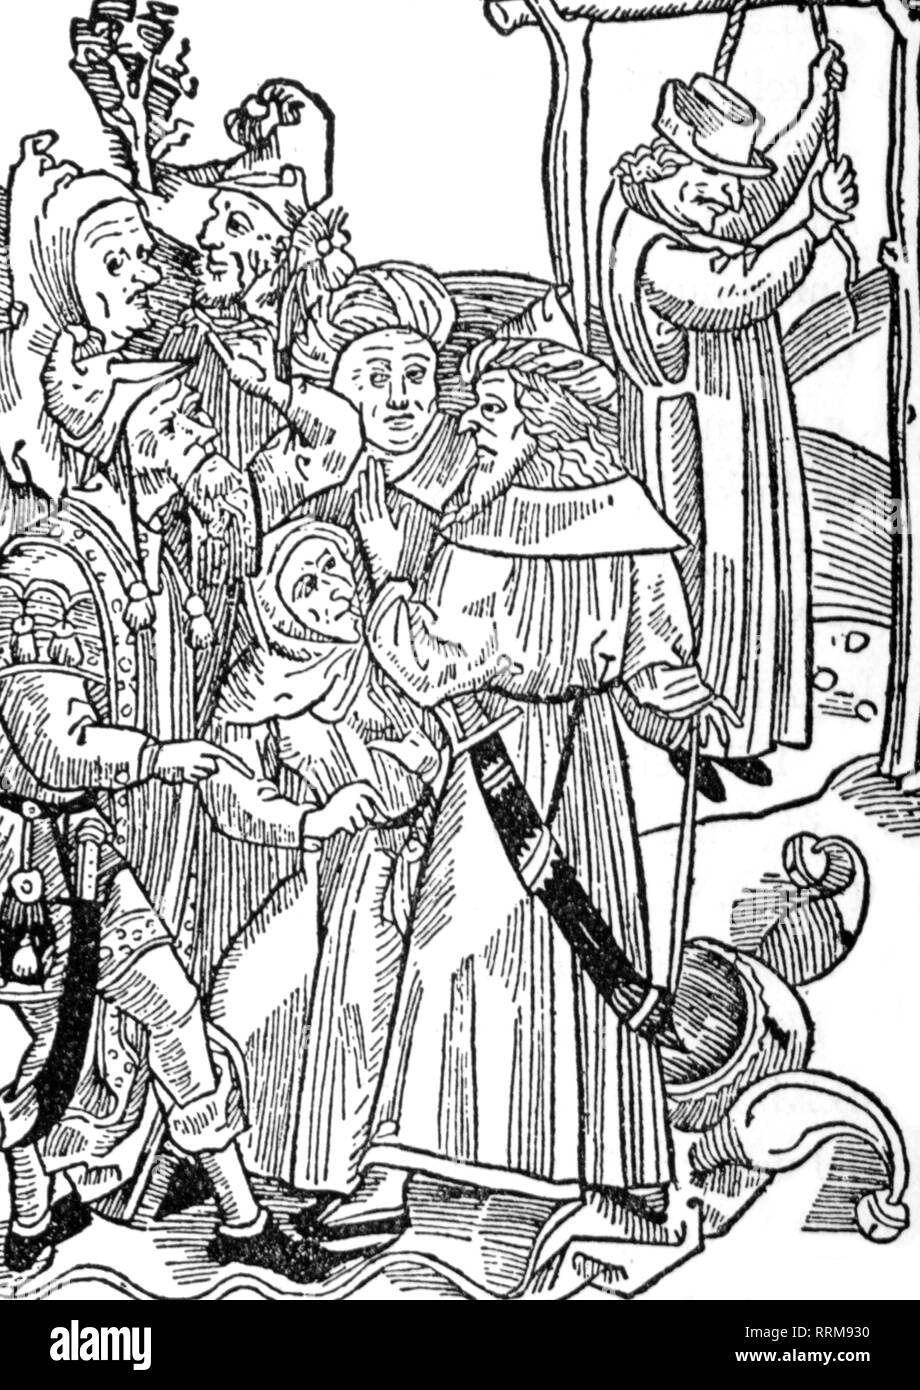 Brant, Sebastian, 1457/1458 - 10.5.1521, German humanist and author / writer, works, 'The Ship of Fools', printed by Johann Bergmann von Olpe, Basel, 1494, woodcut to the 98th chapter, 'Of Foreign Fools', Additional-Rights-Clearance-Info-Not-Available Stock Photo